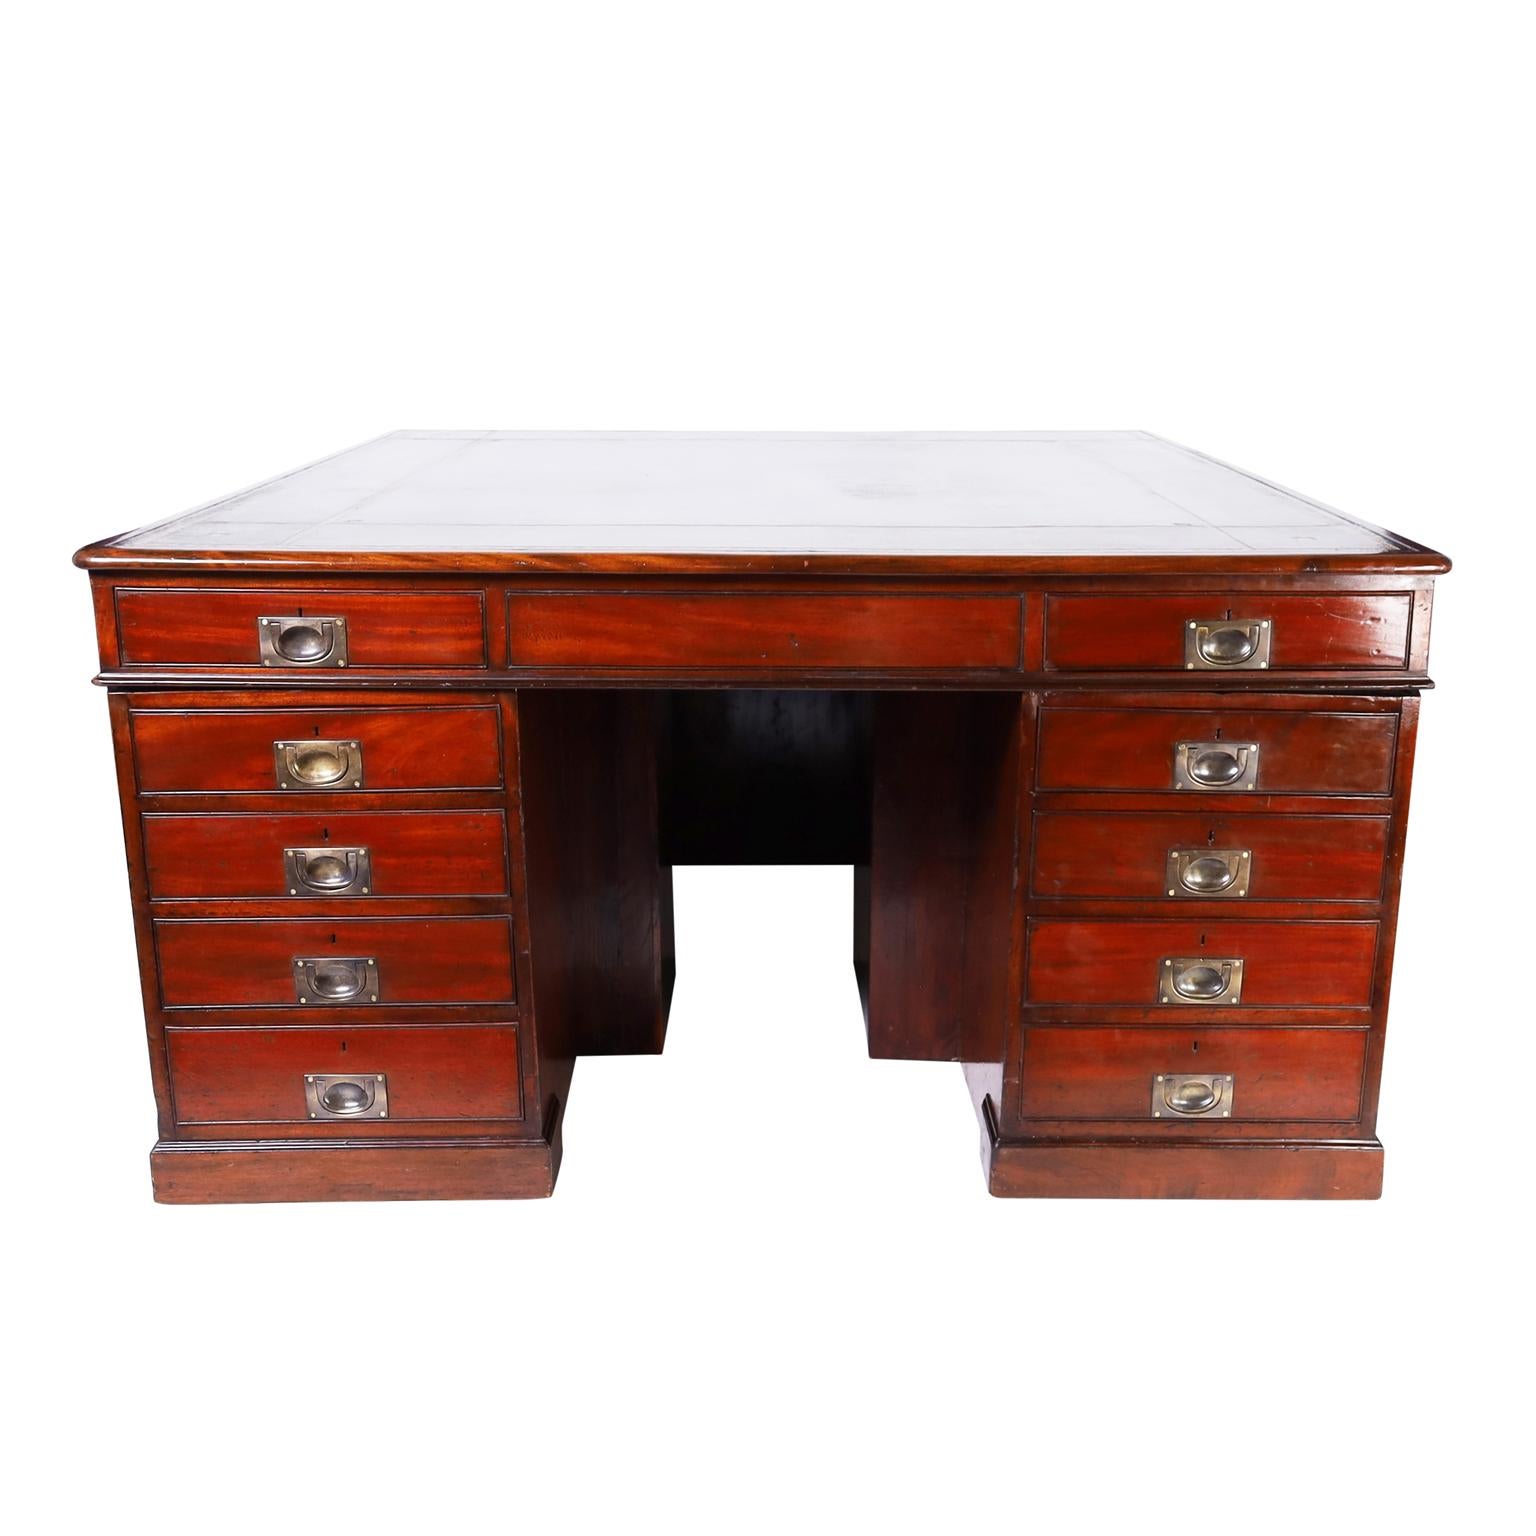 British Colonial Antique Campaign Leather Top Three Person Desk or Workspace In Good Condition For Sale In Palm Beach, FL